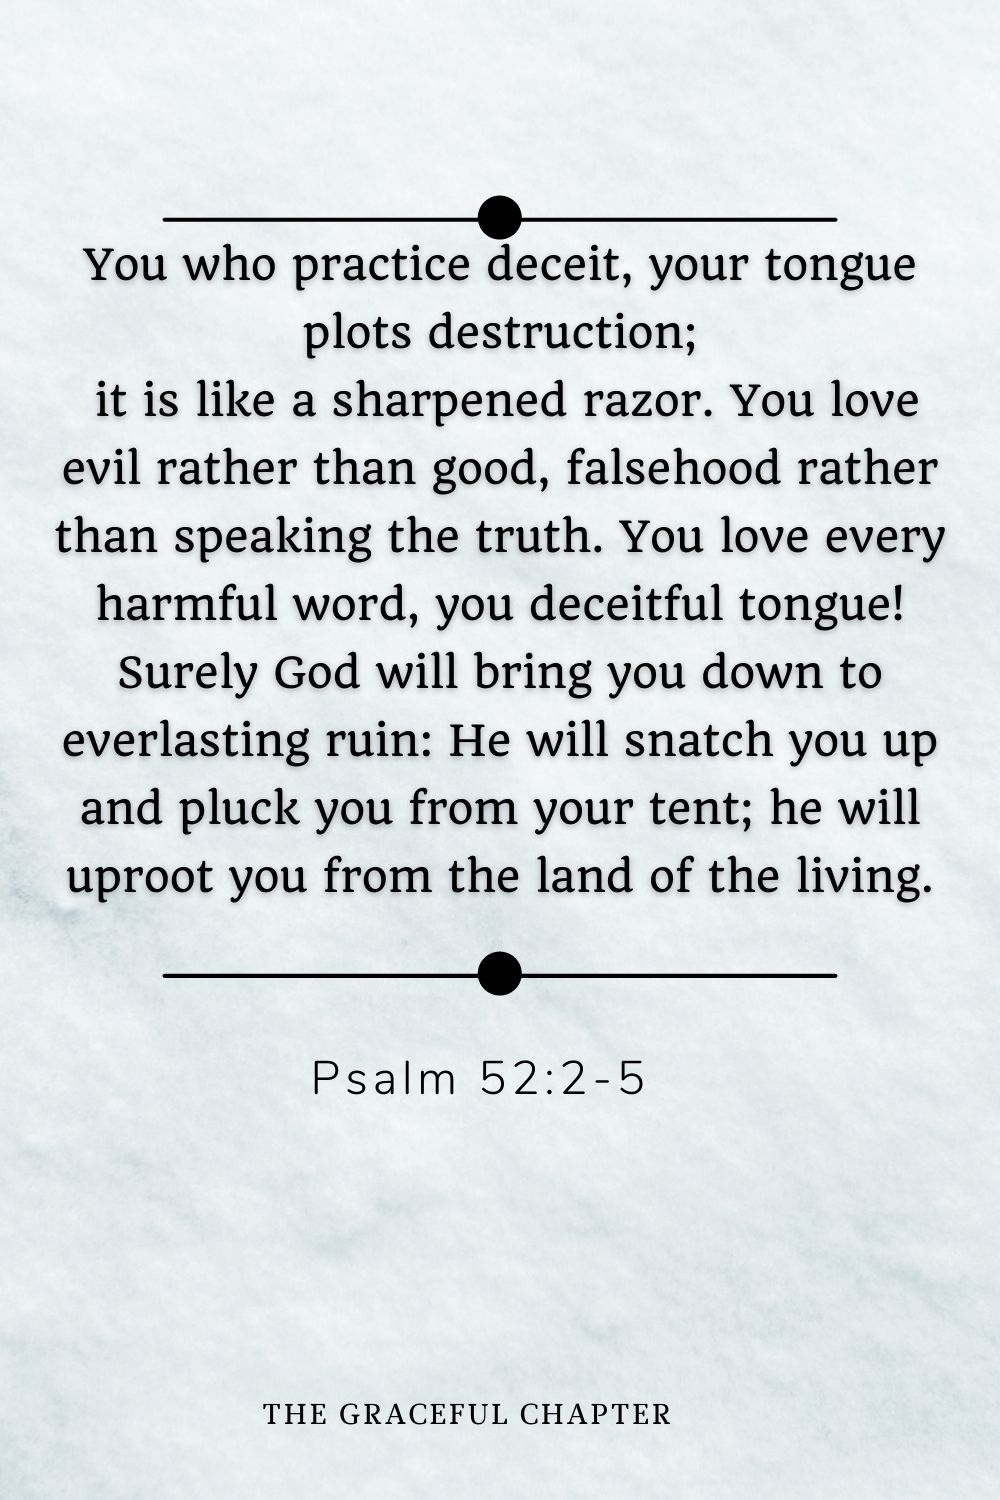 You who practice deceit, your tongue plots destruction;  it is like a sharpened razor. You love evil rather than good, falsehood rather than speaking the truth. You love every harmful word, you deceitful tongue! Surely God will bring you down to everlasting ruin: He will snatch you up and pluck you from your tent; he will uproot you from the land of the living. You who practice deceit, your tongue plots destruction;  it is like a sharpened razor. You love evil rather than good, falsehood rather than speaking the truth. You love every harmful word, you deceitful tongue! Surely God will bring you down to everlasting ruin: He will snatch you up and pluck you from your tent; he will uproot you from the land of the living. Psalm 52:2-5